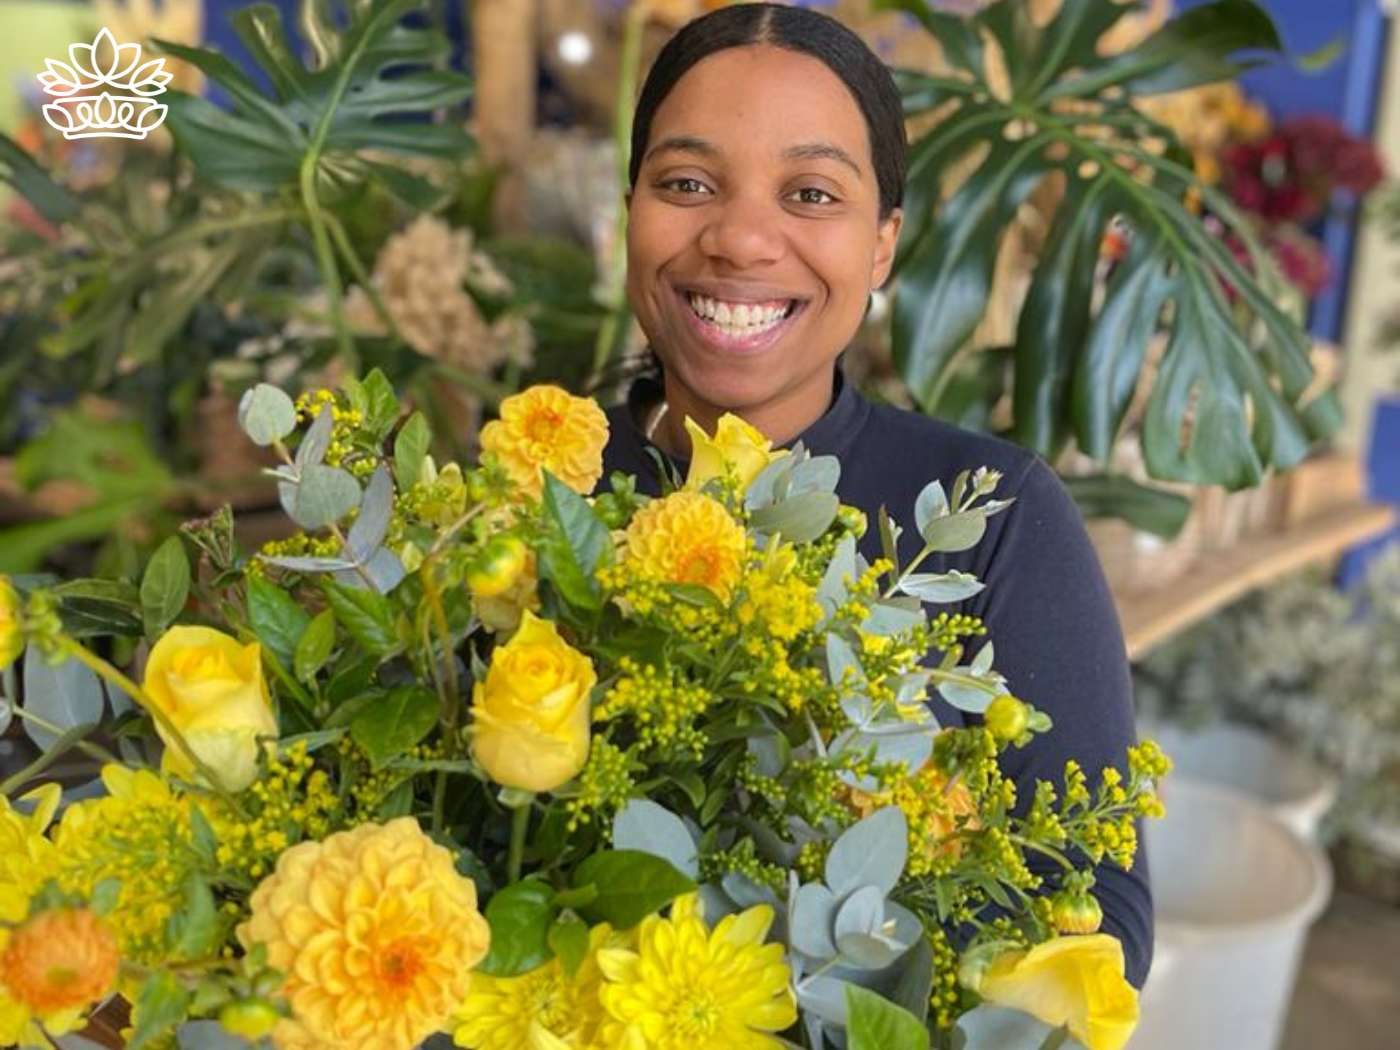 Alt text: "A radiant young woman with a warm smile holds a vibrant bunch of yellow roses and complementary colourful flowers at a florist shop, symbolising the cheerful essence of life. Fabulous Flowers and Gifts.